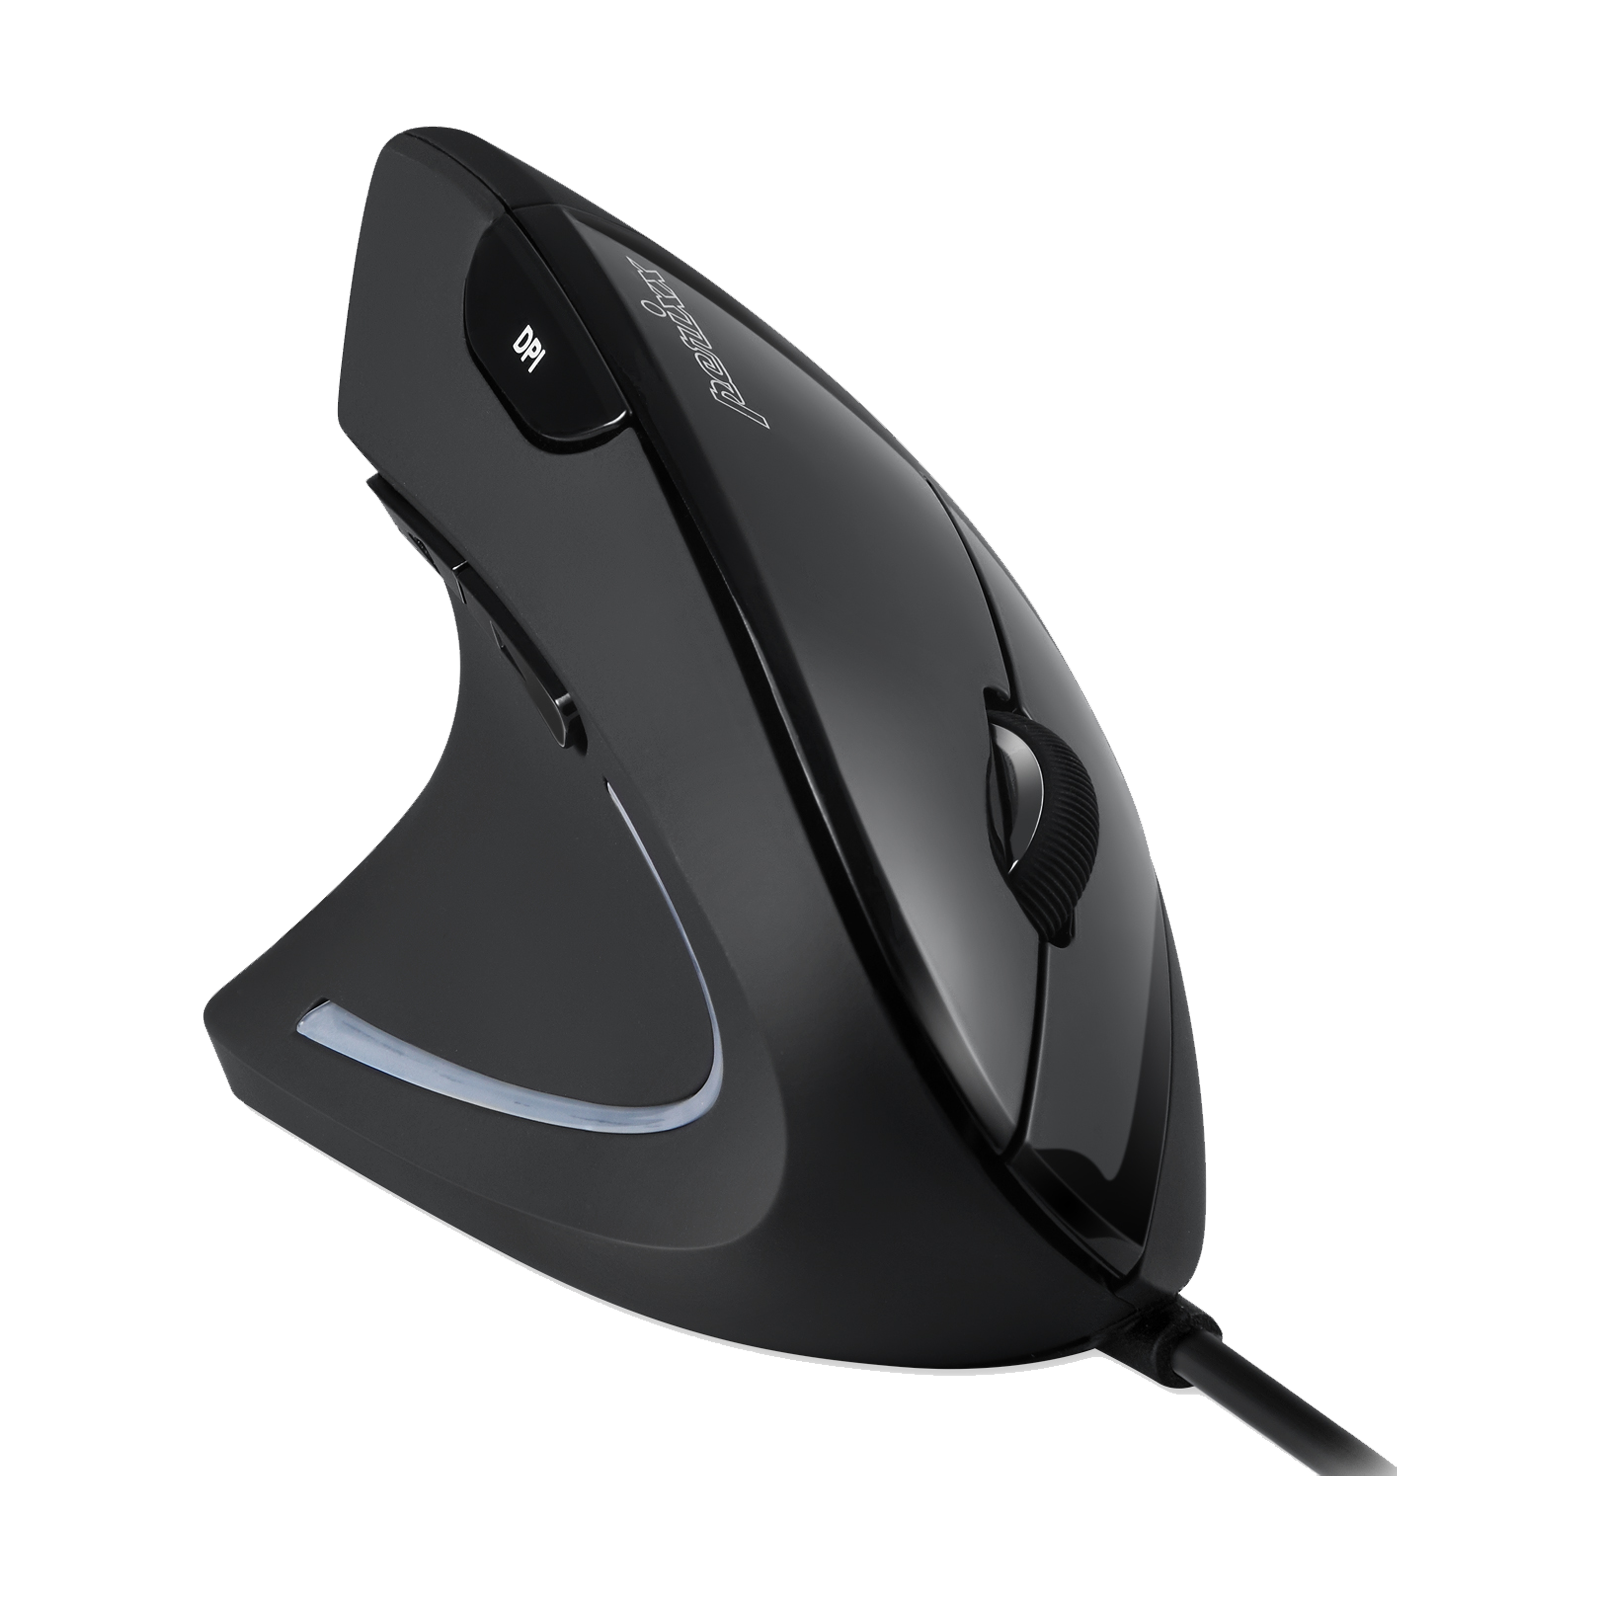 PERIMICE-513 L - Wired Left-Handed Ergonomic Vertical Mouse 6 Buttons  1000/1600 DPI